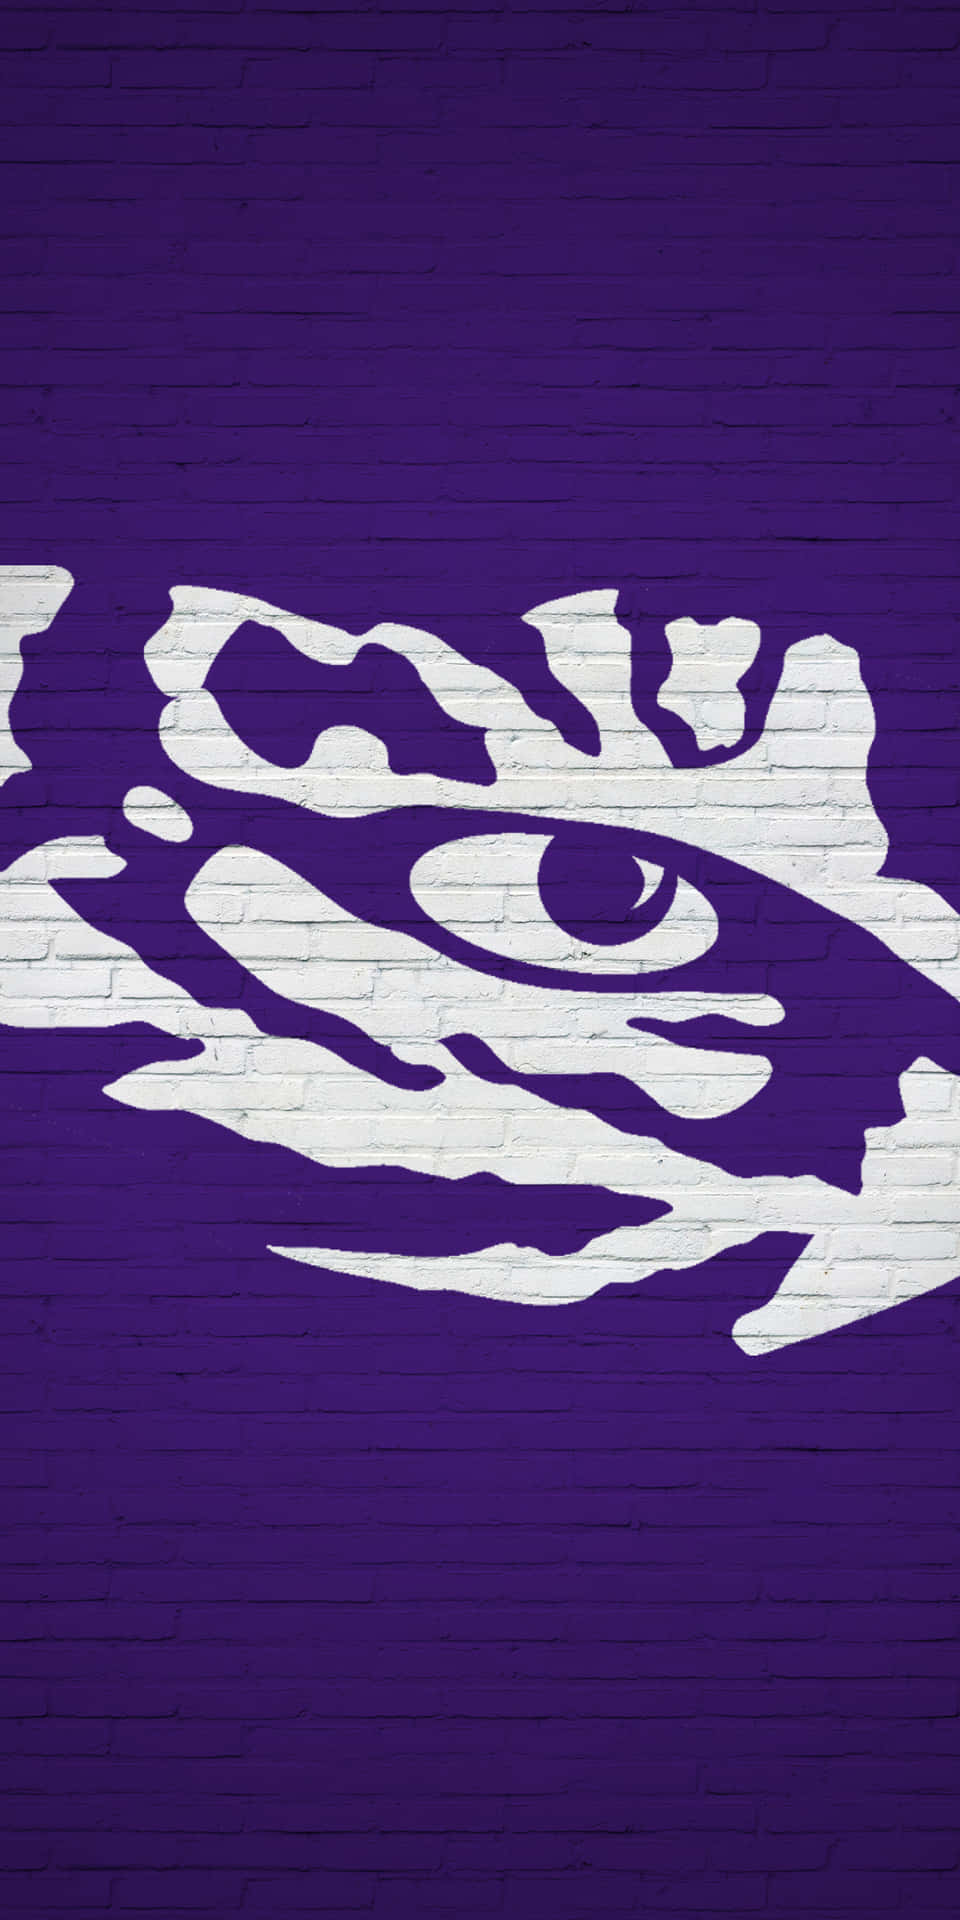 A Purple And White Tiger Logo On A Brick Wall Wallpaper